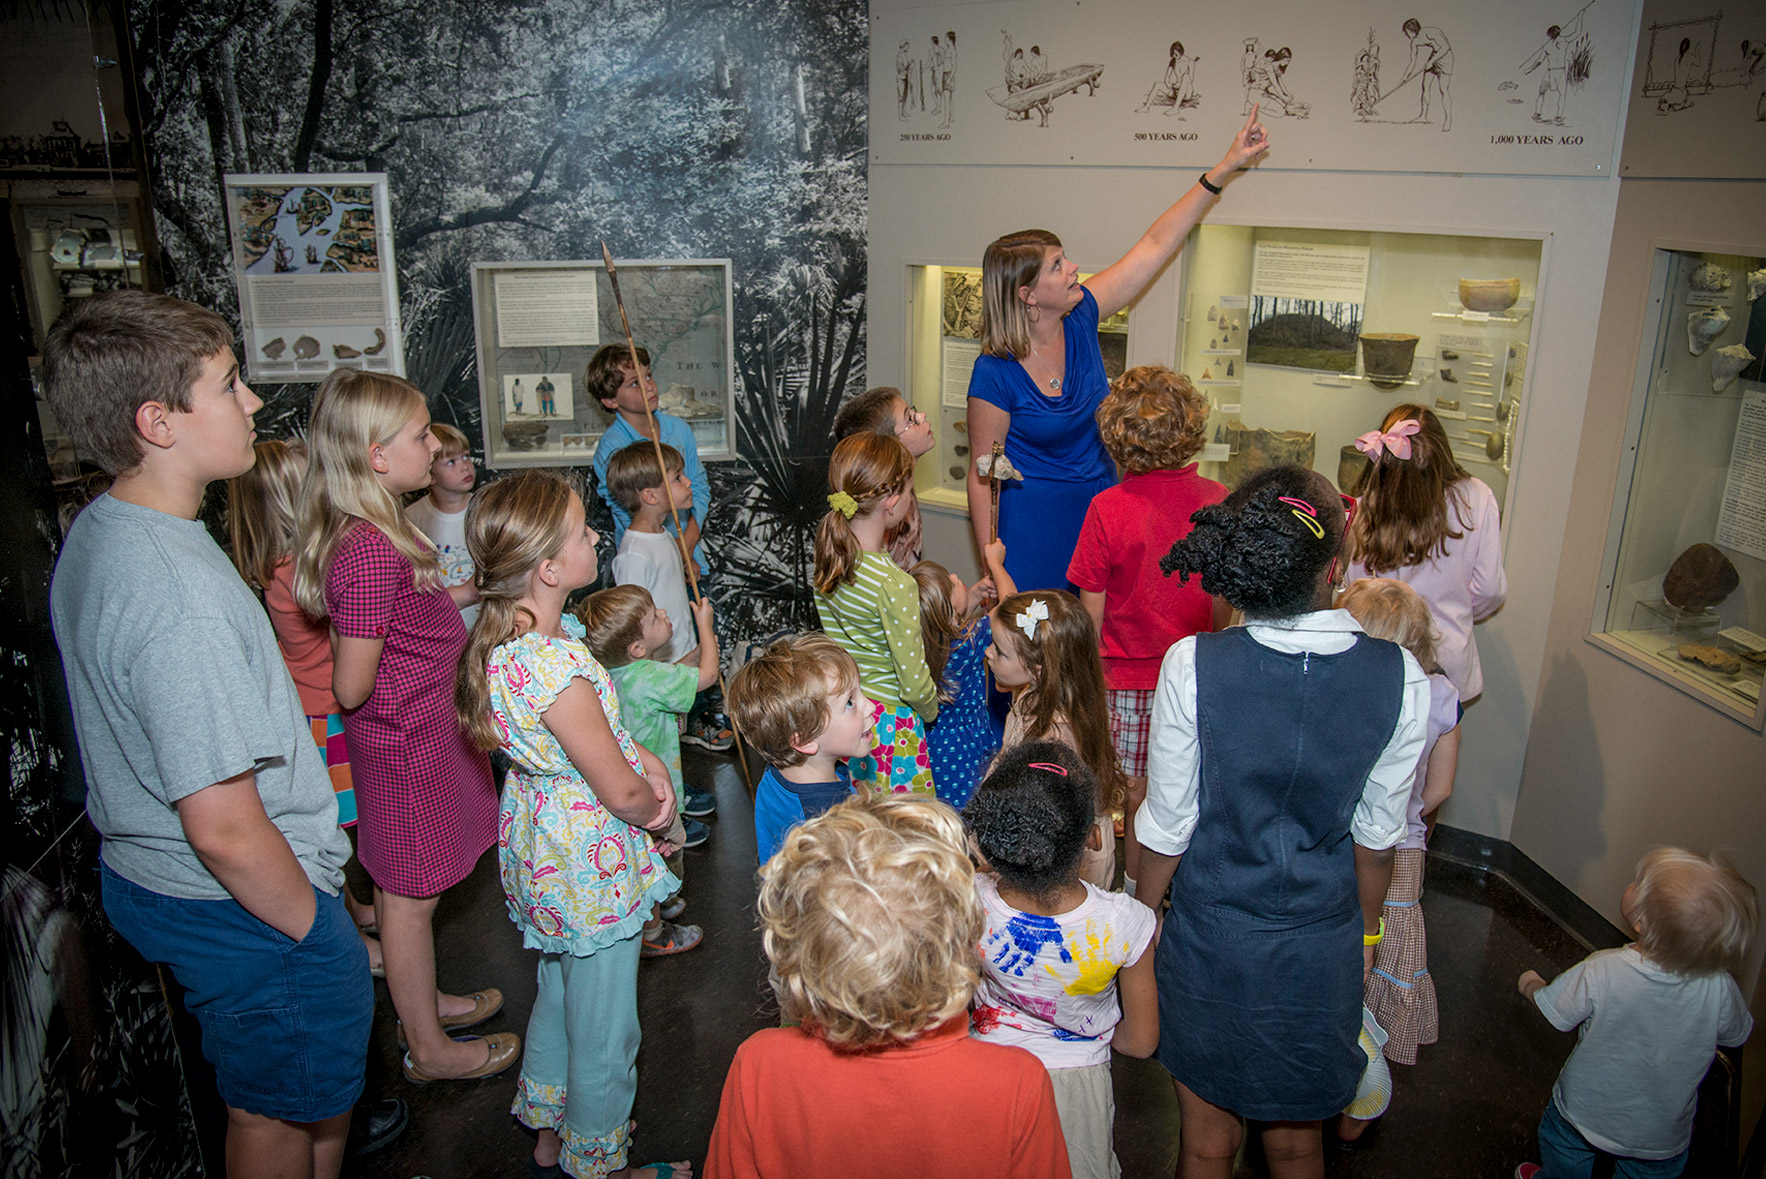 The Charleston Museum Summer Camp, July 16 - 20 (ages 6-11)